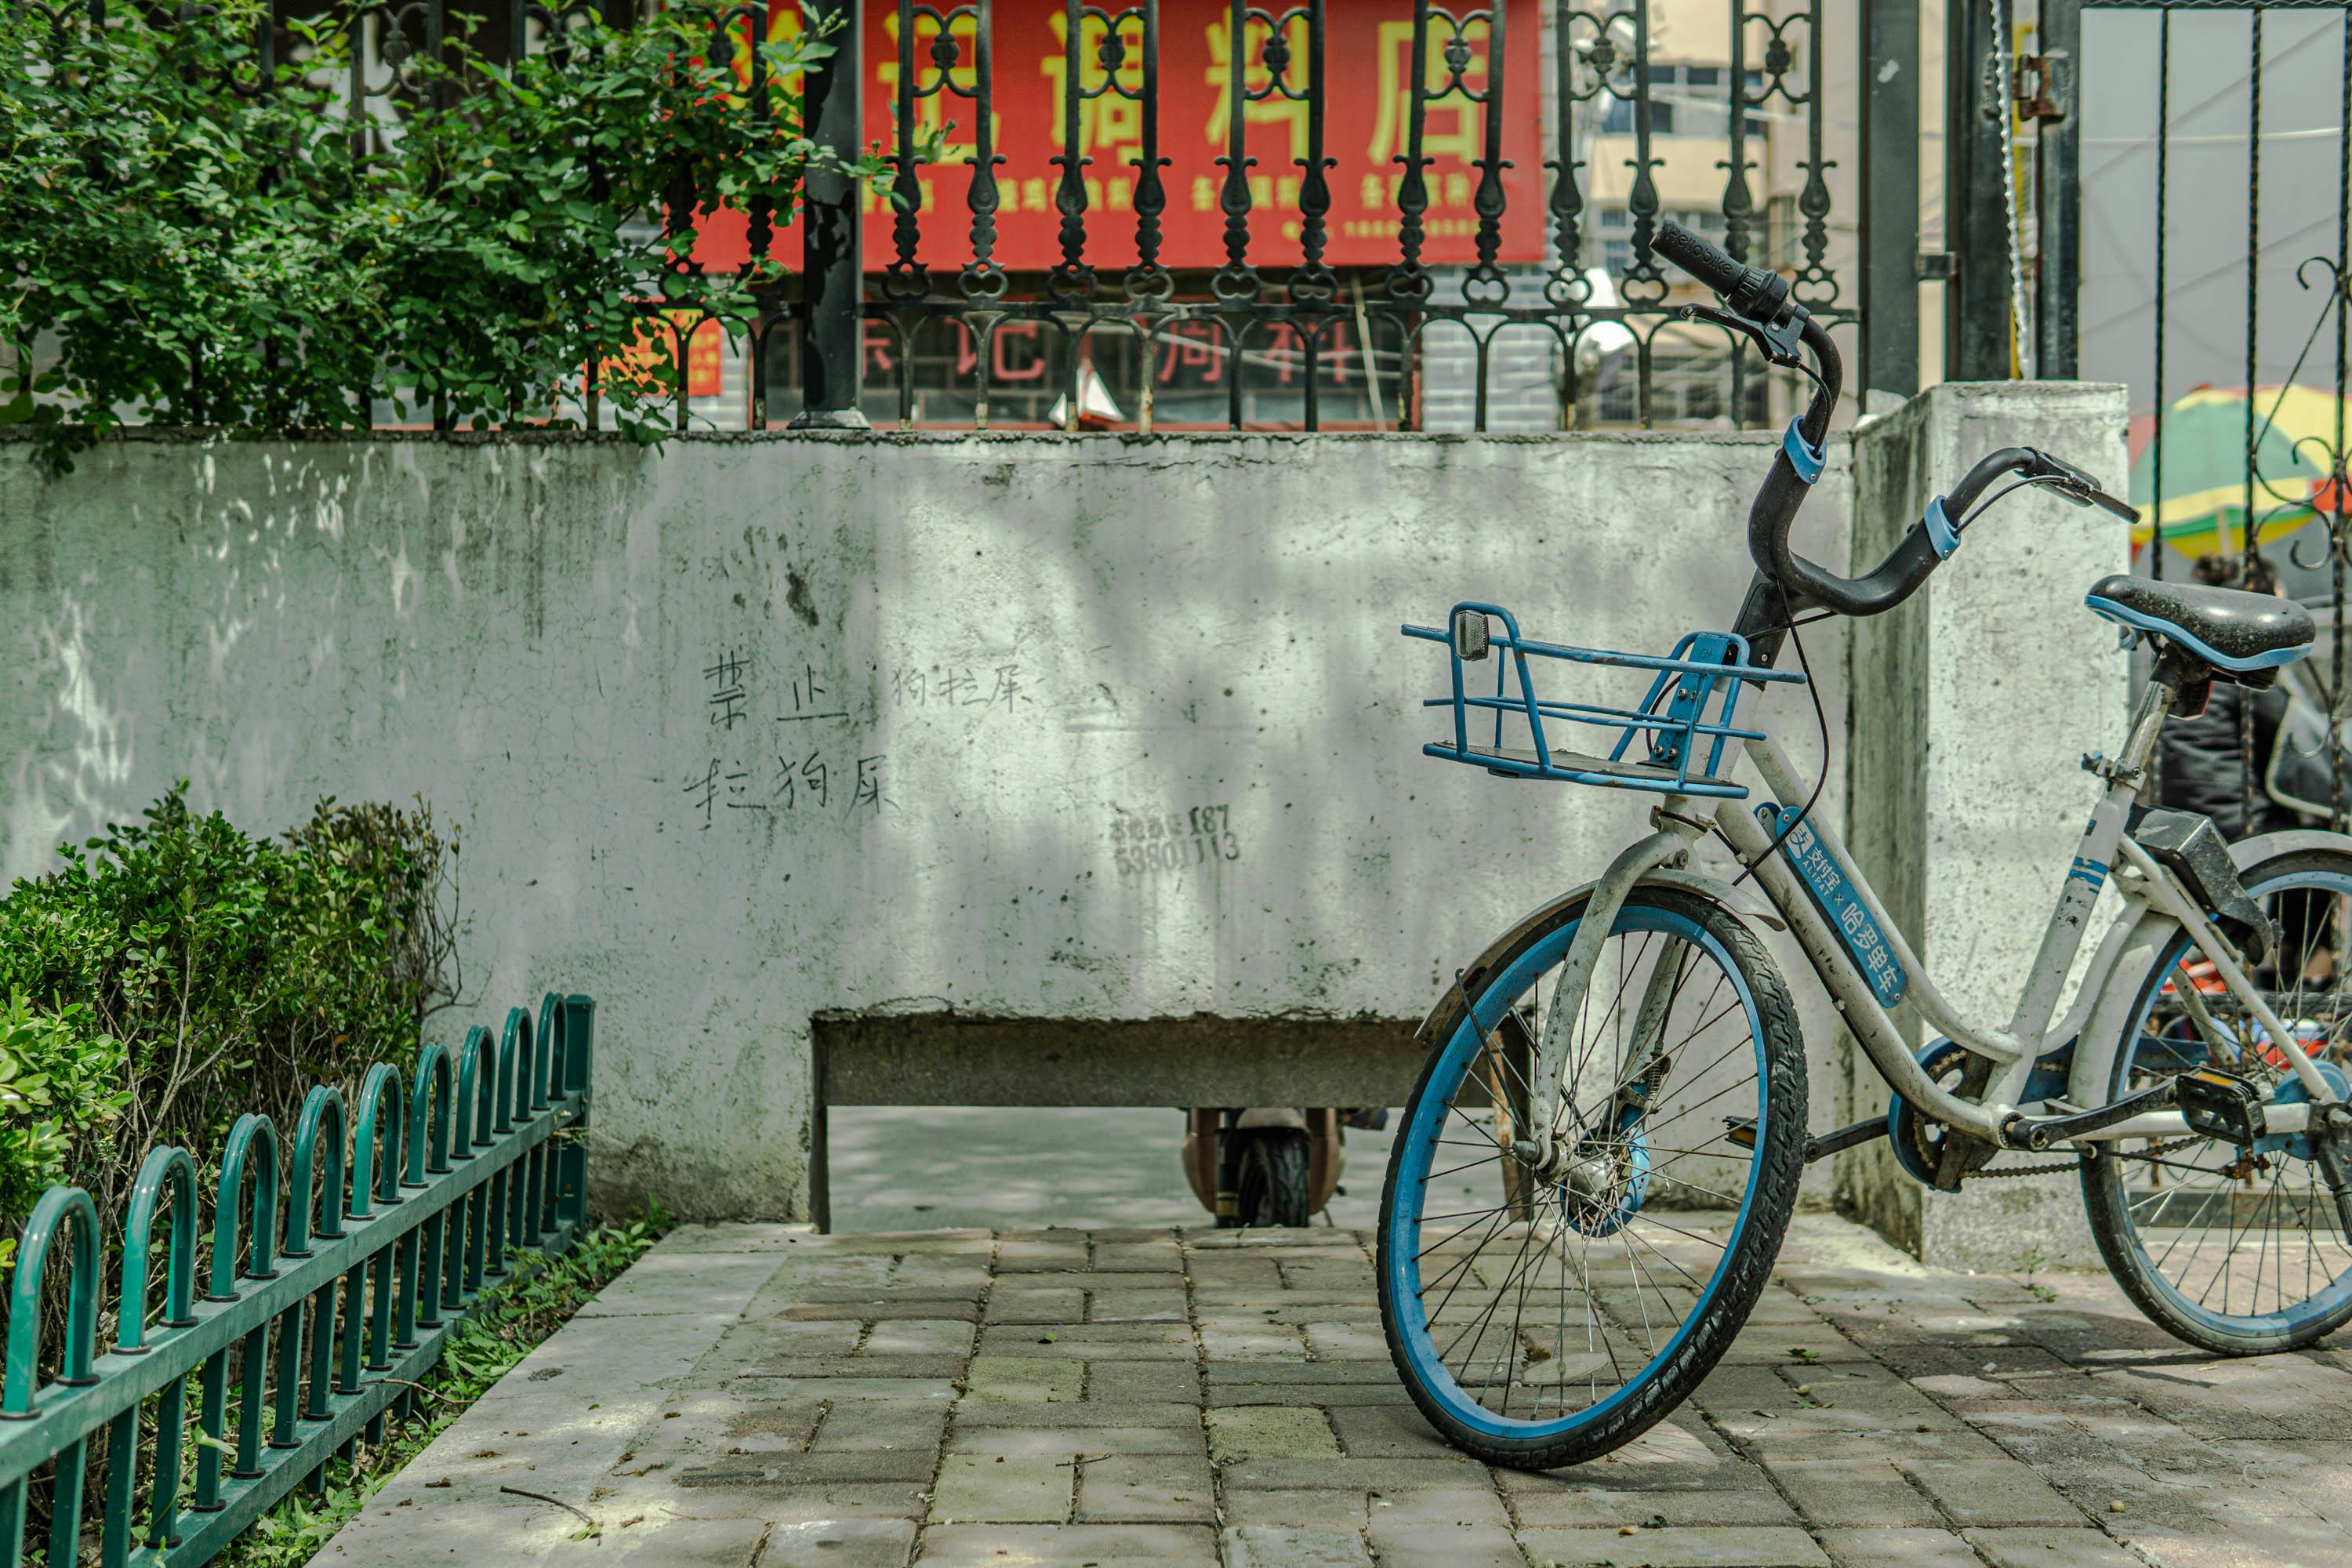 A blue bicycle parked next to a green fence